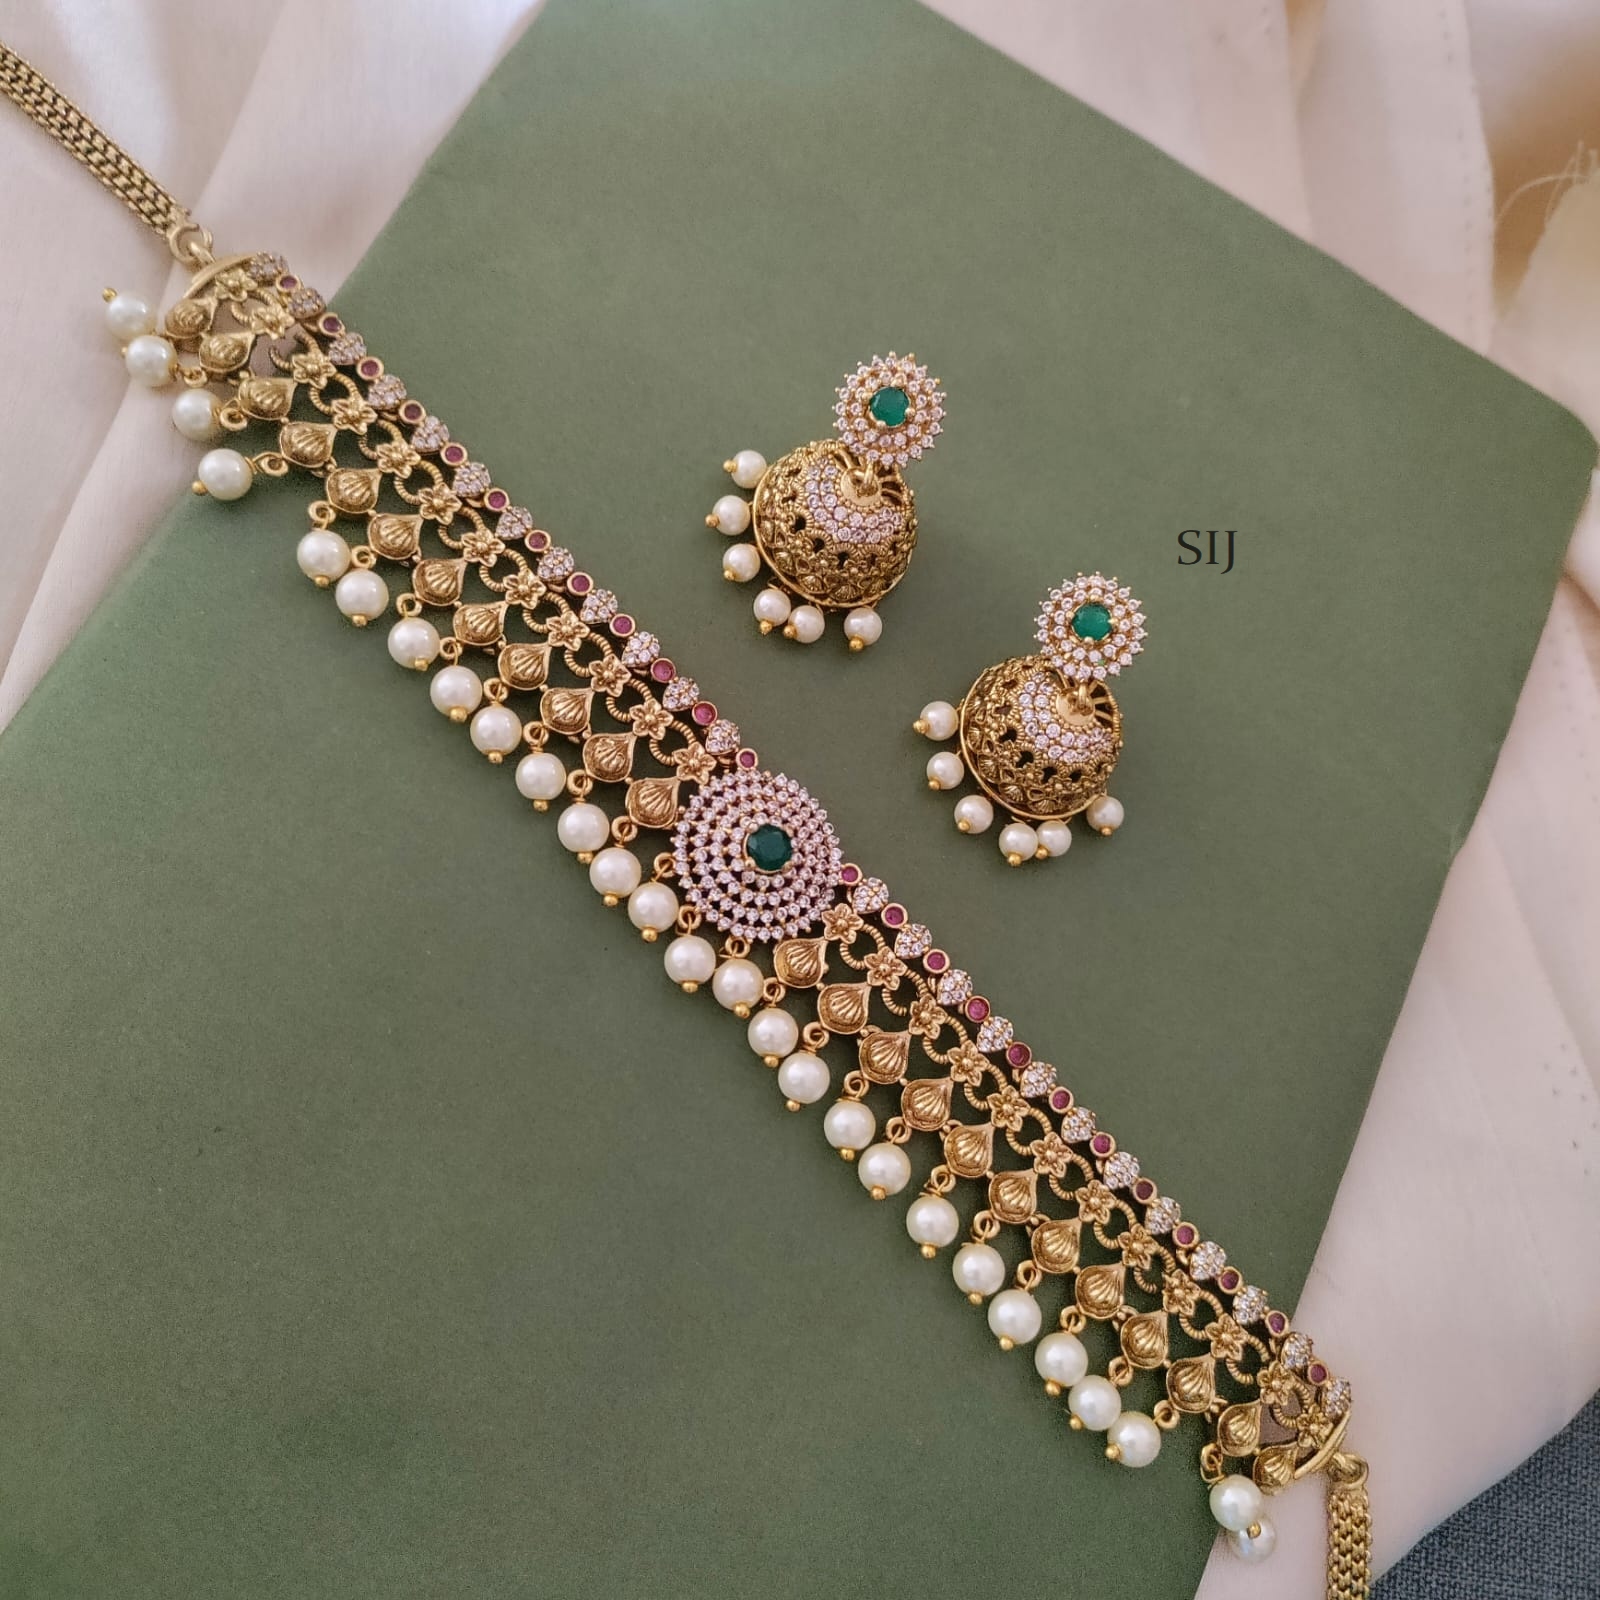 Imitation CZ Stones Choker with Pearls Hangings